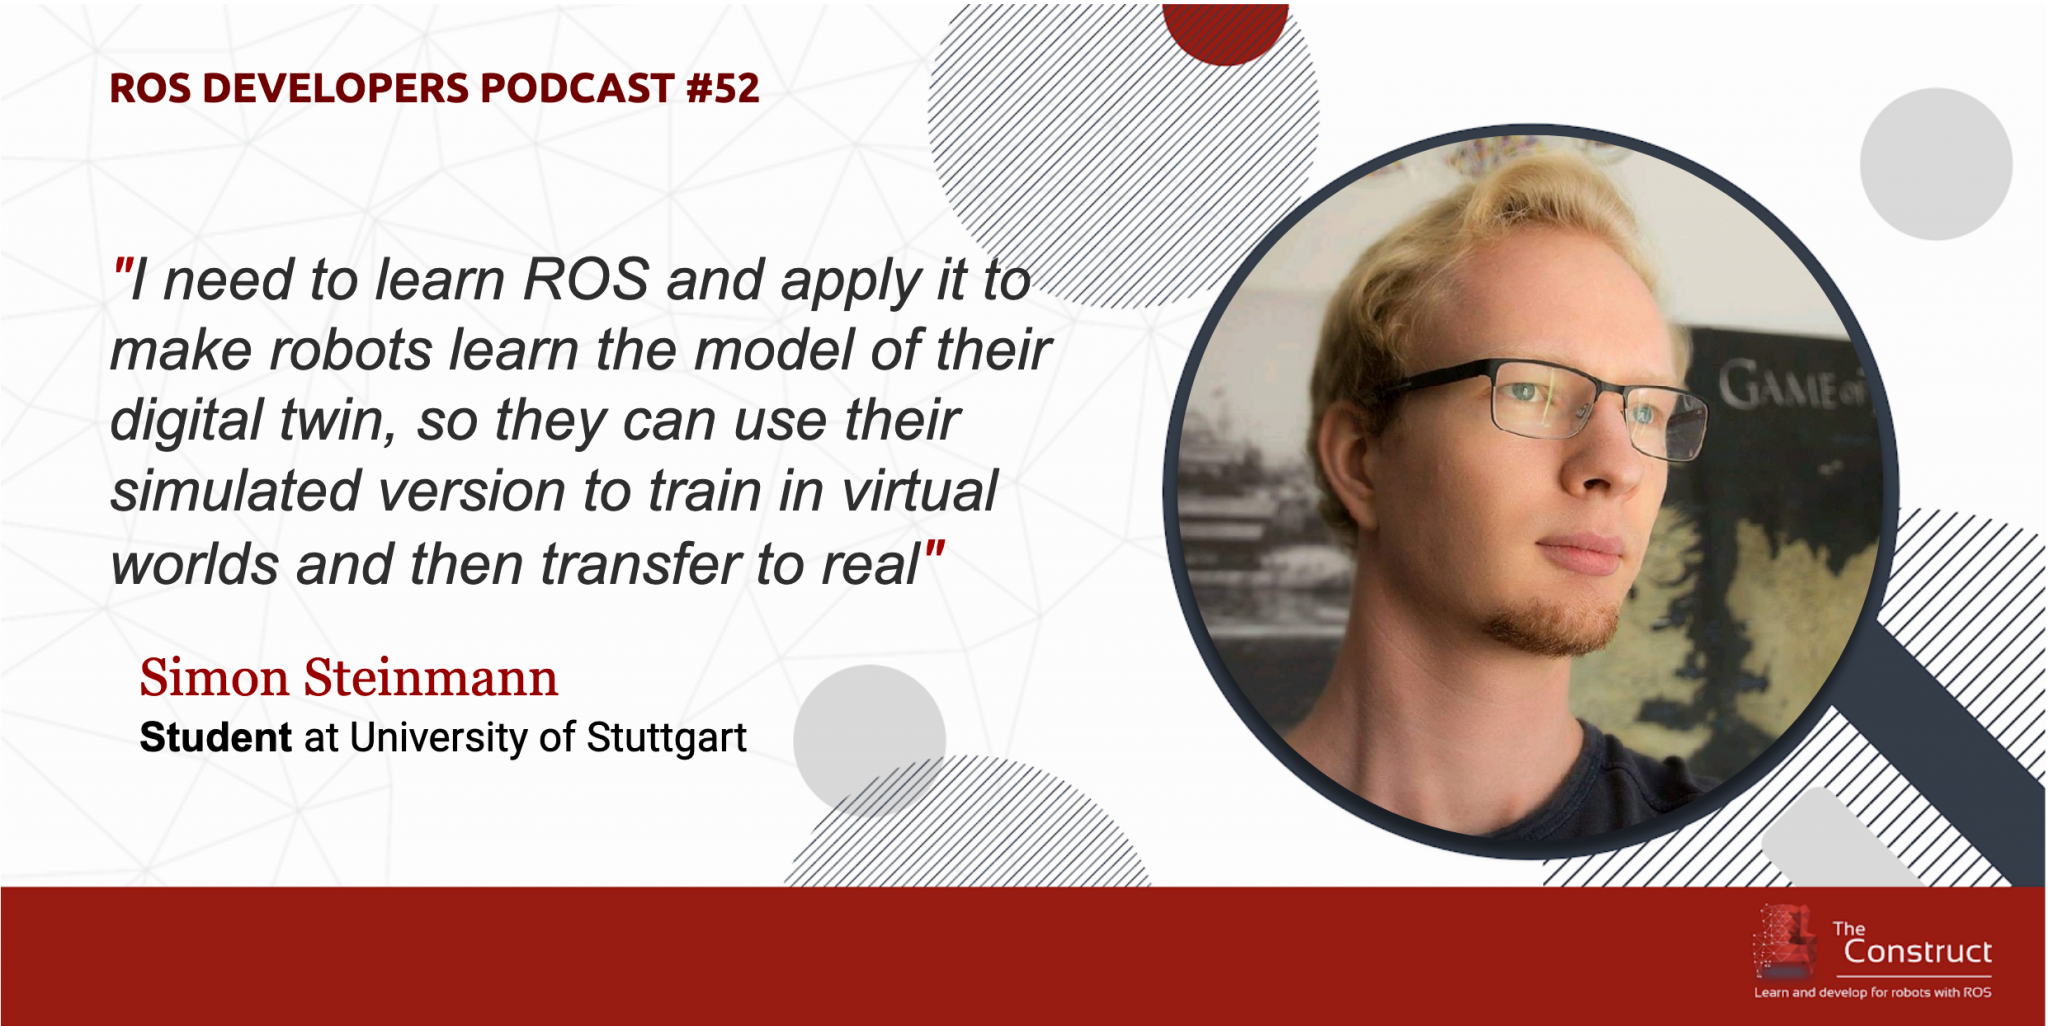 ROS Student Simon Steinmann Shares His ROS Learning Experience